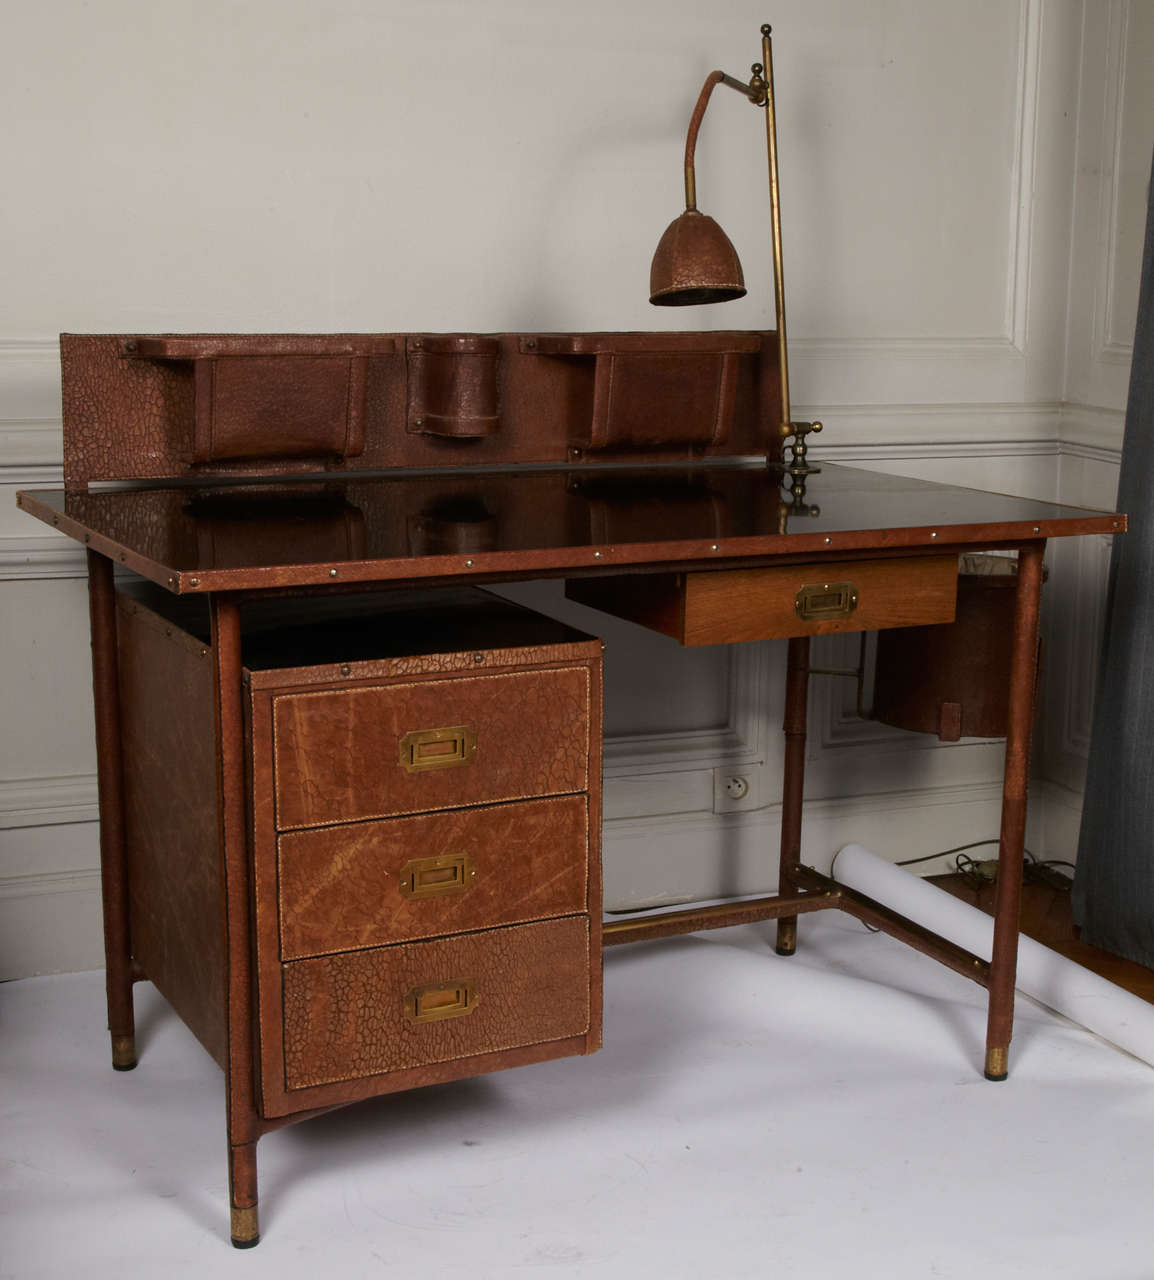 Rare Jacques Adnet desk with lamp, book rack and bin.